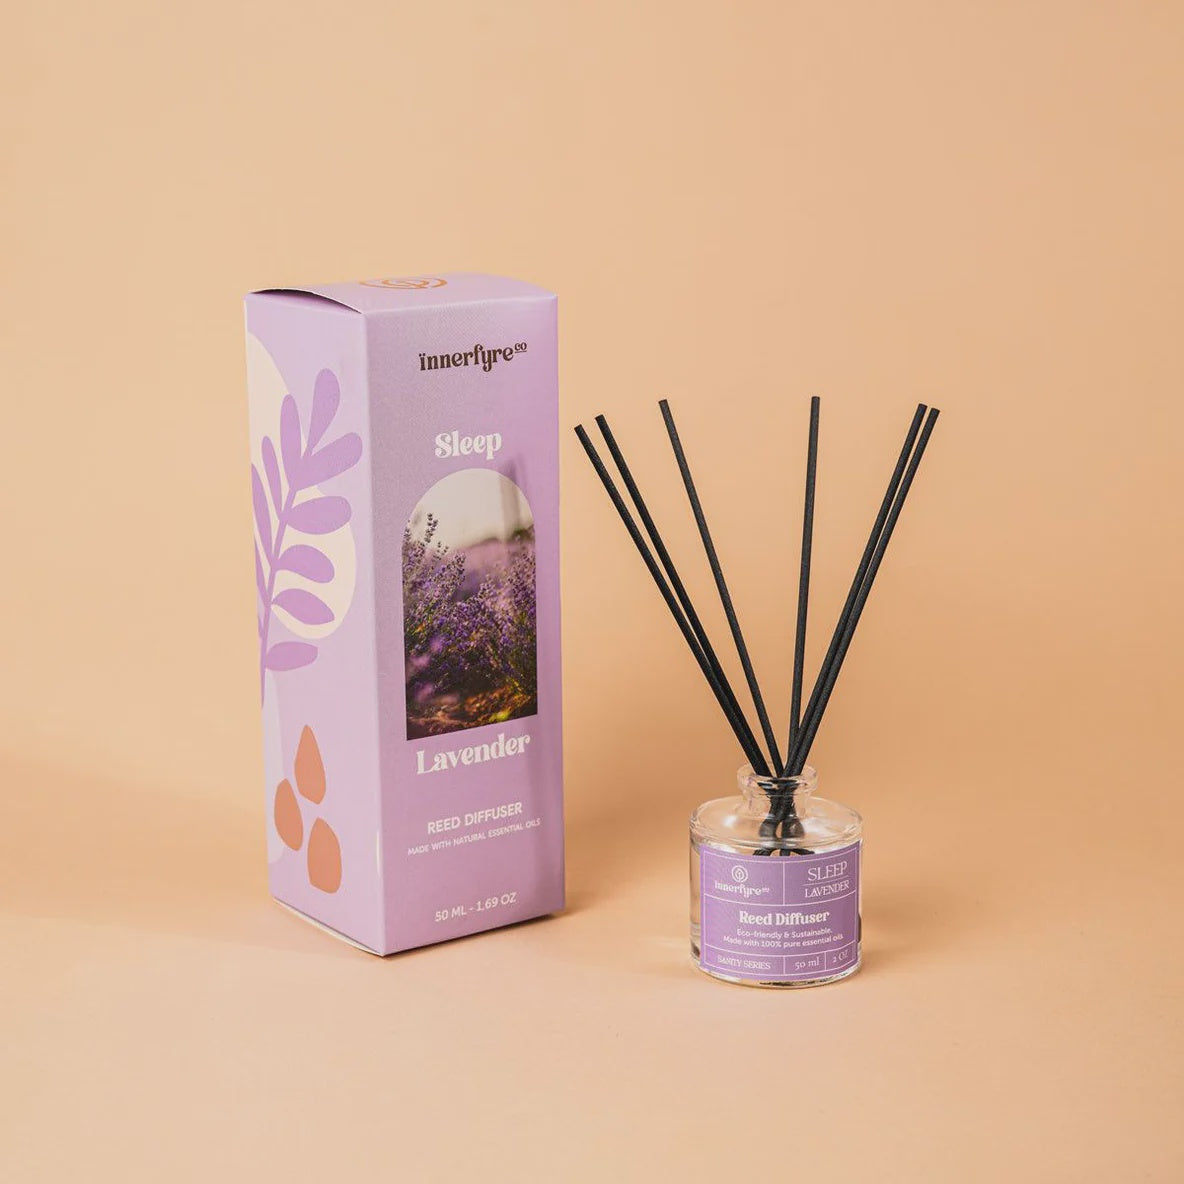 Sleep Diffuser 100ml by Innerfyre Co | Available at The Green Collective